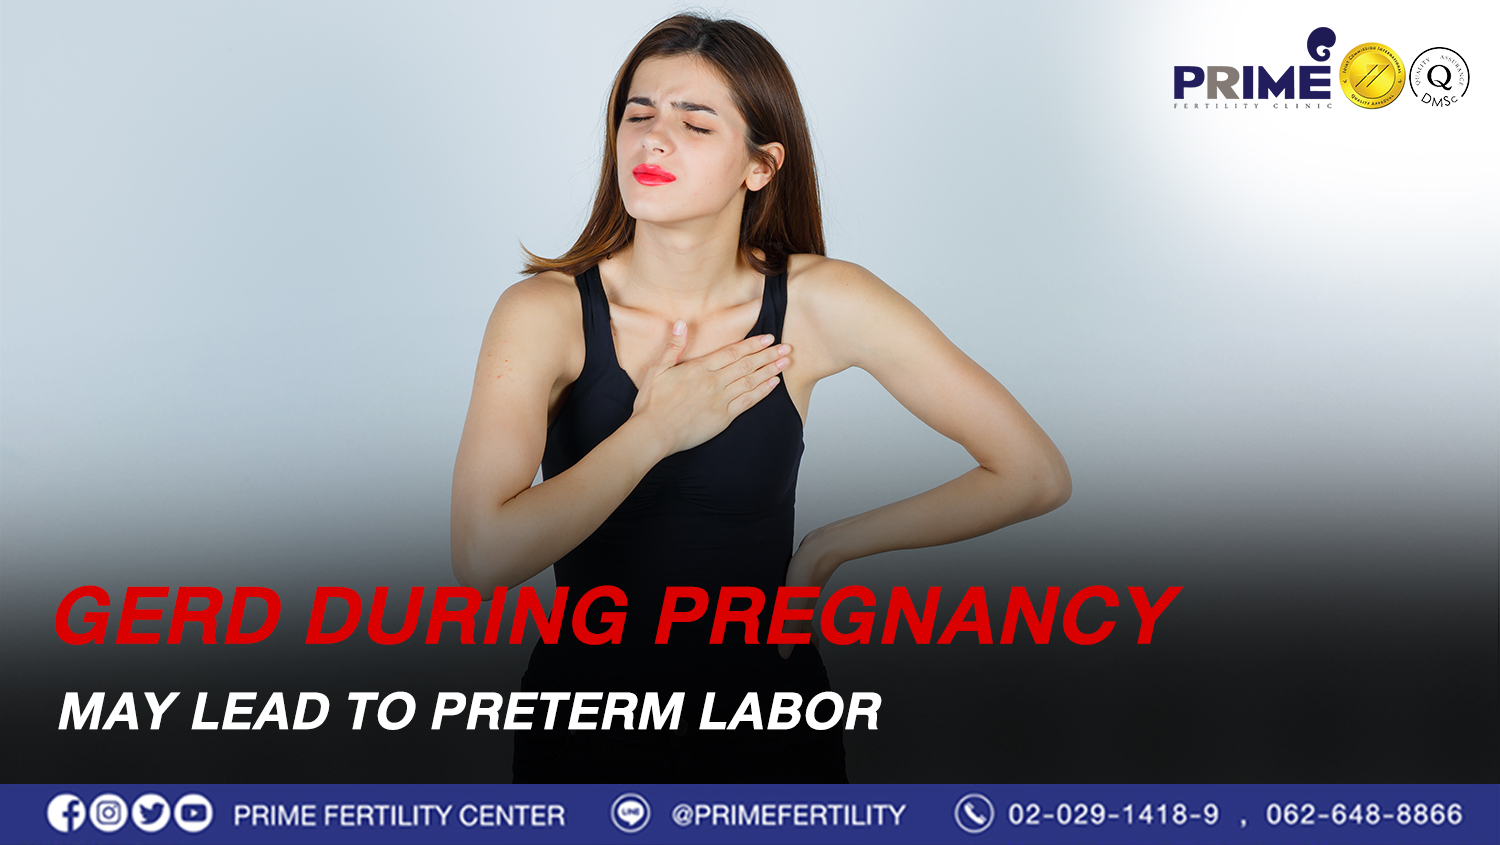 GERD during pregnancy may lead to preterm labor